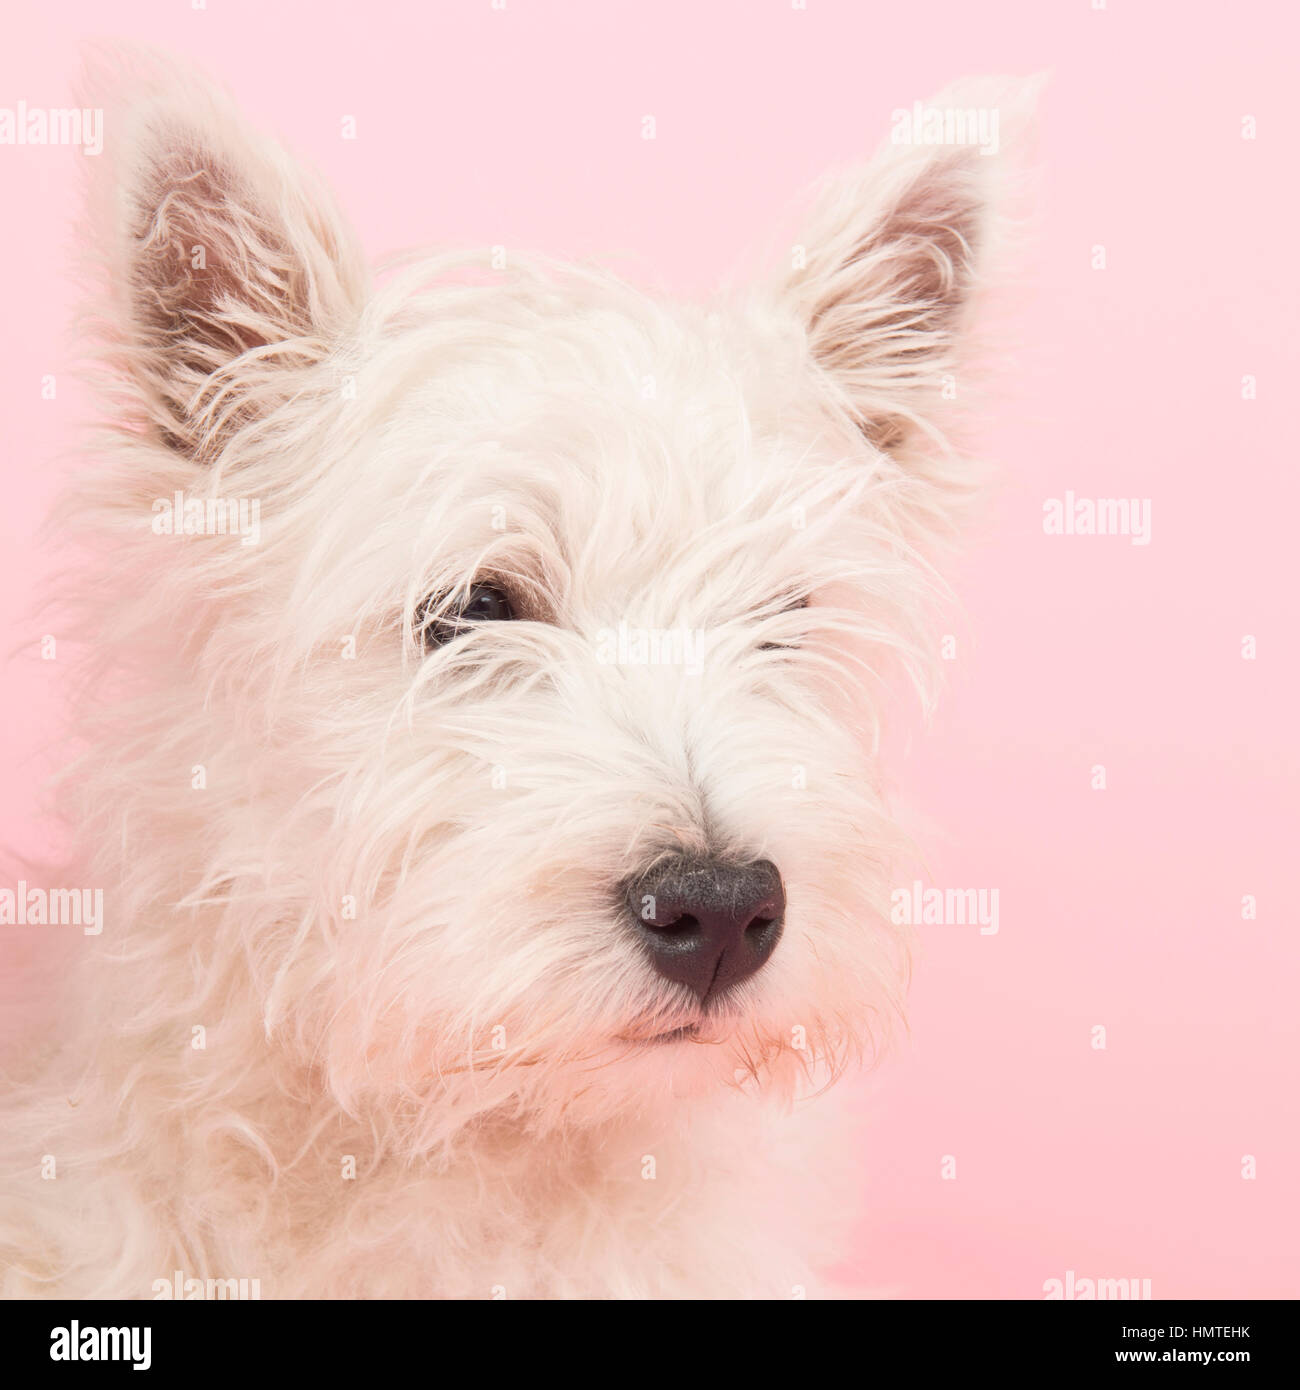 West Highland White Terrier or Westie or Westy Stock Photo